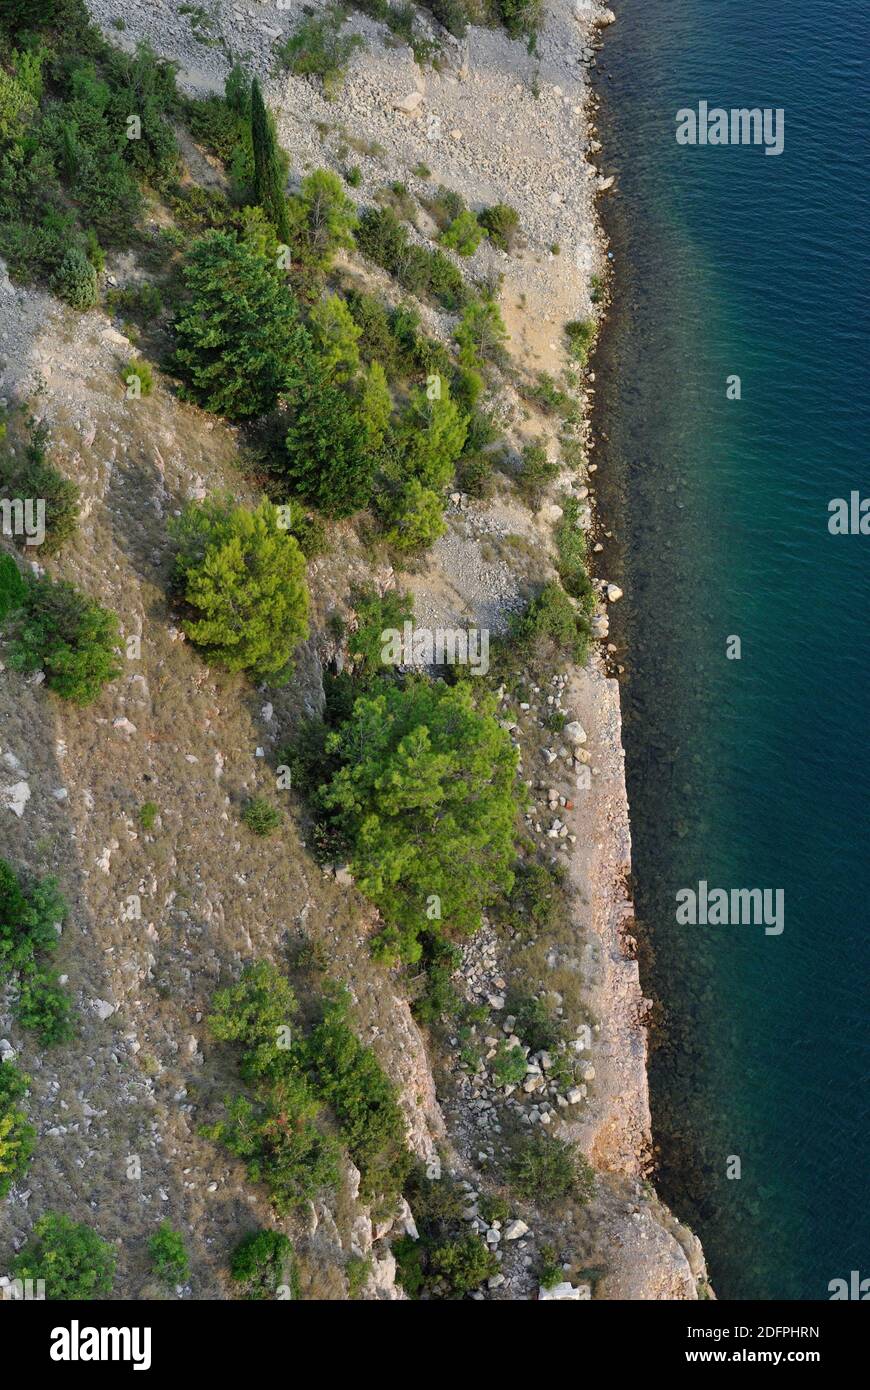 Stony beach in Croatia from above with blue green water Stock Photo